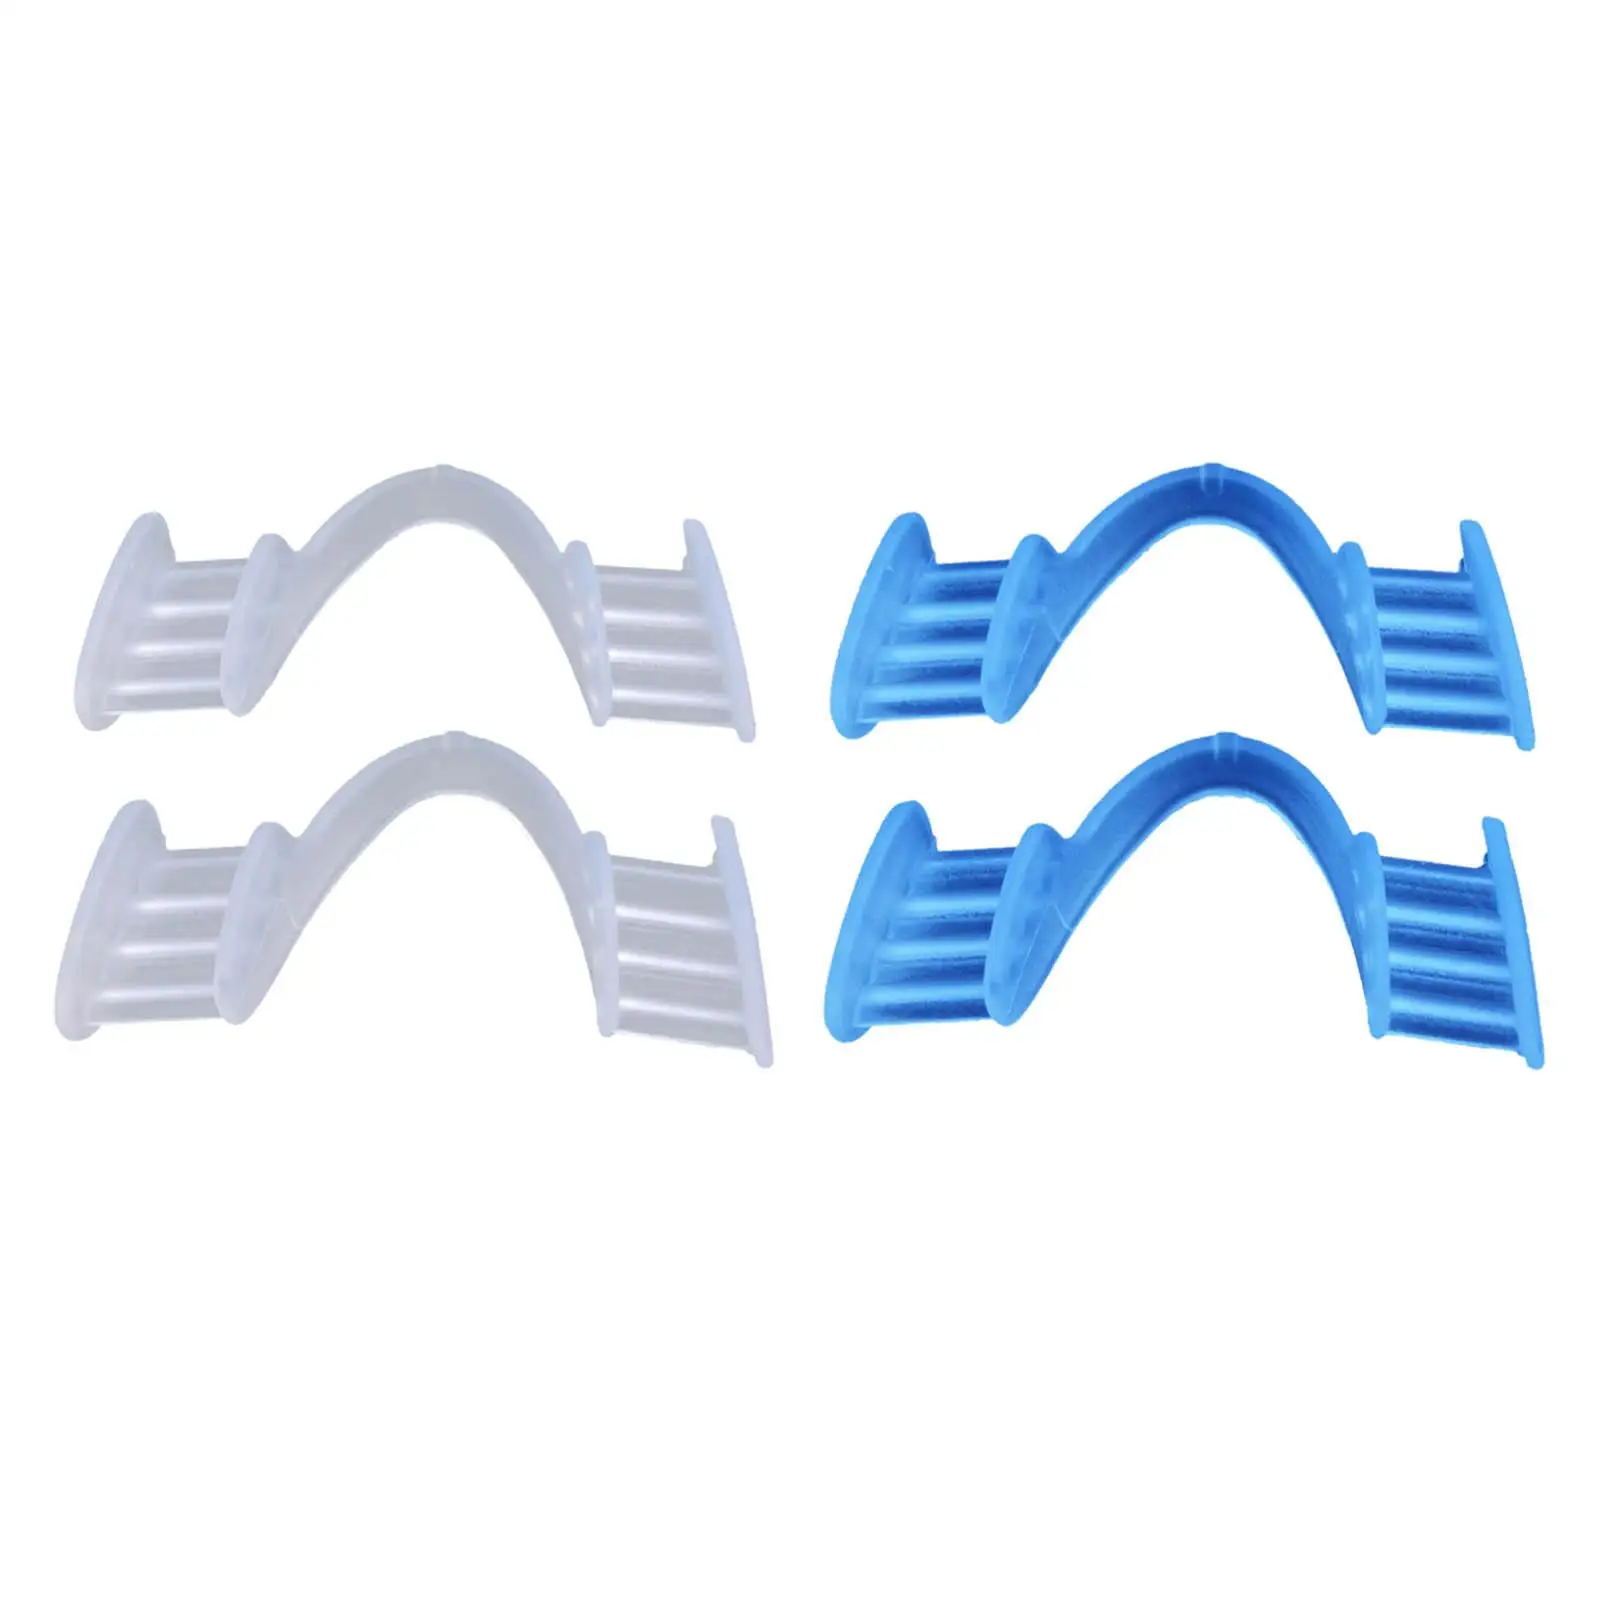 2Pcs Silicone Night Mouth Guard Prevent Clenching Sleeping Mouth Guard Tooth Protector Night Guard Tooth Guard for Anti Grinding